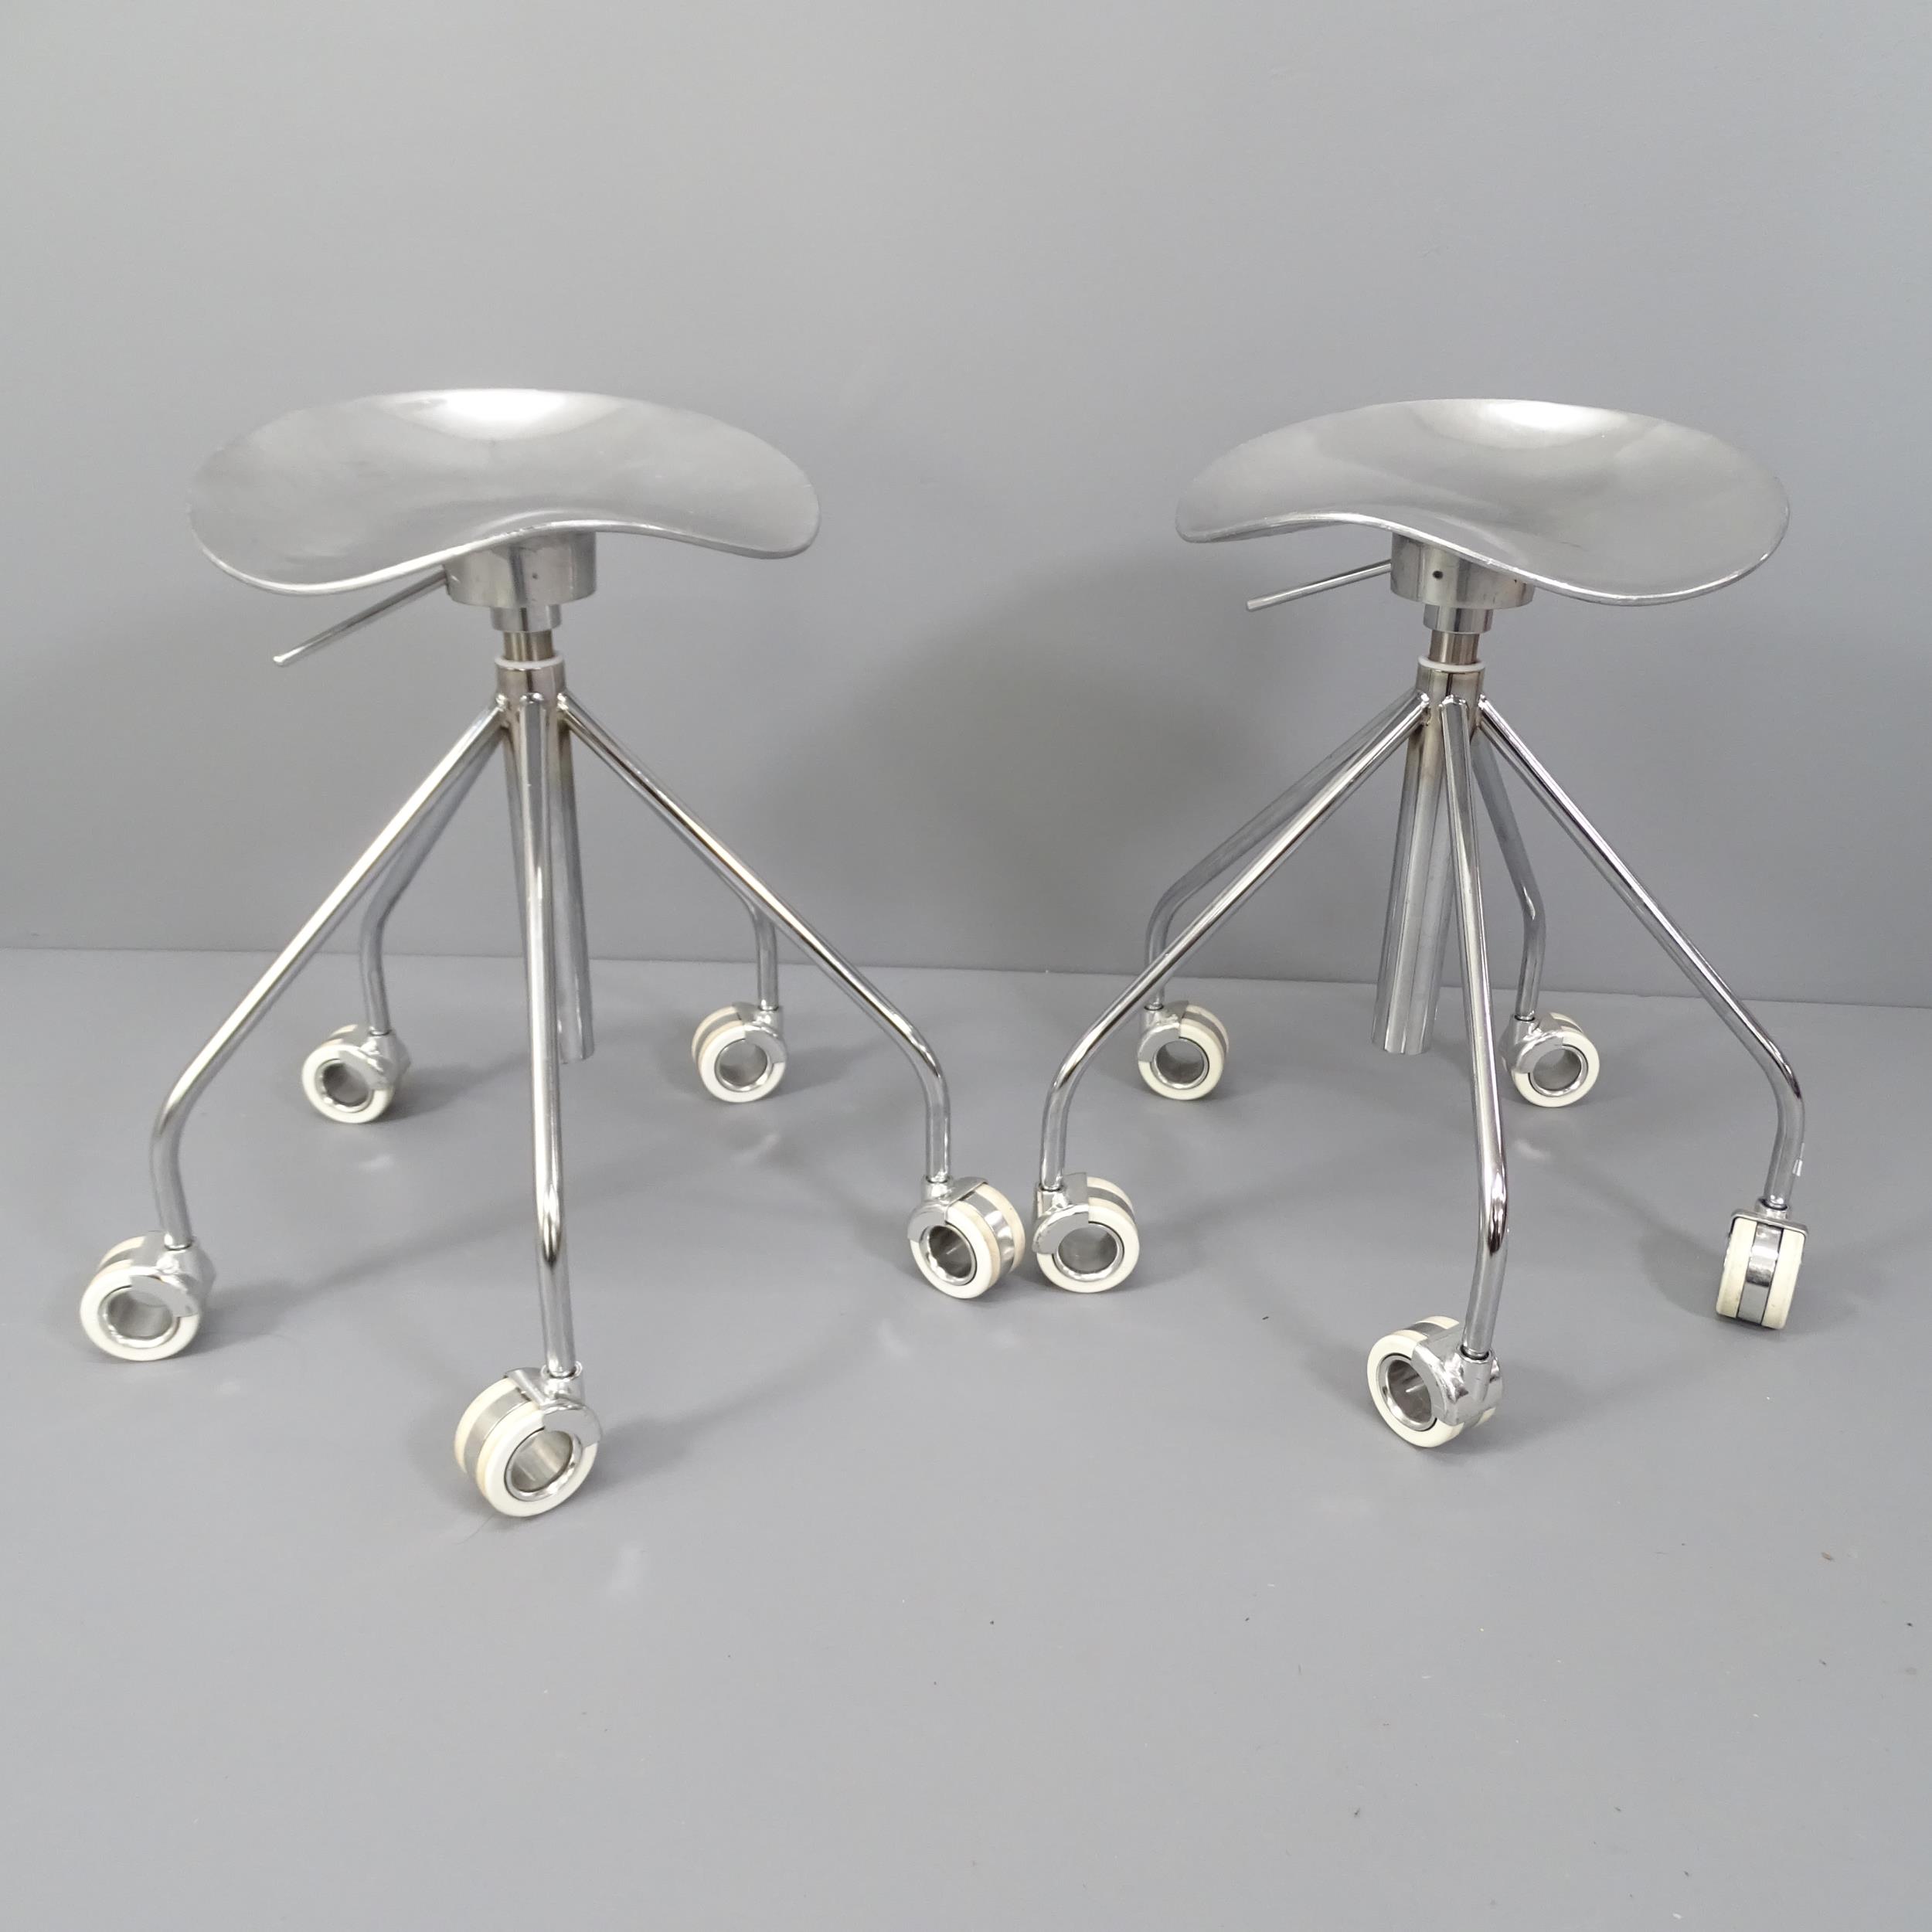 A pair of polished cast aluminium stools with gas height adjust on white hollow wheels.